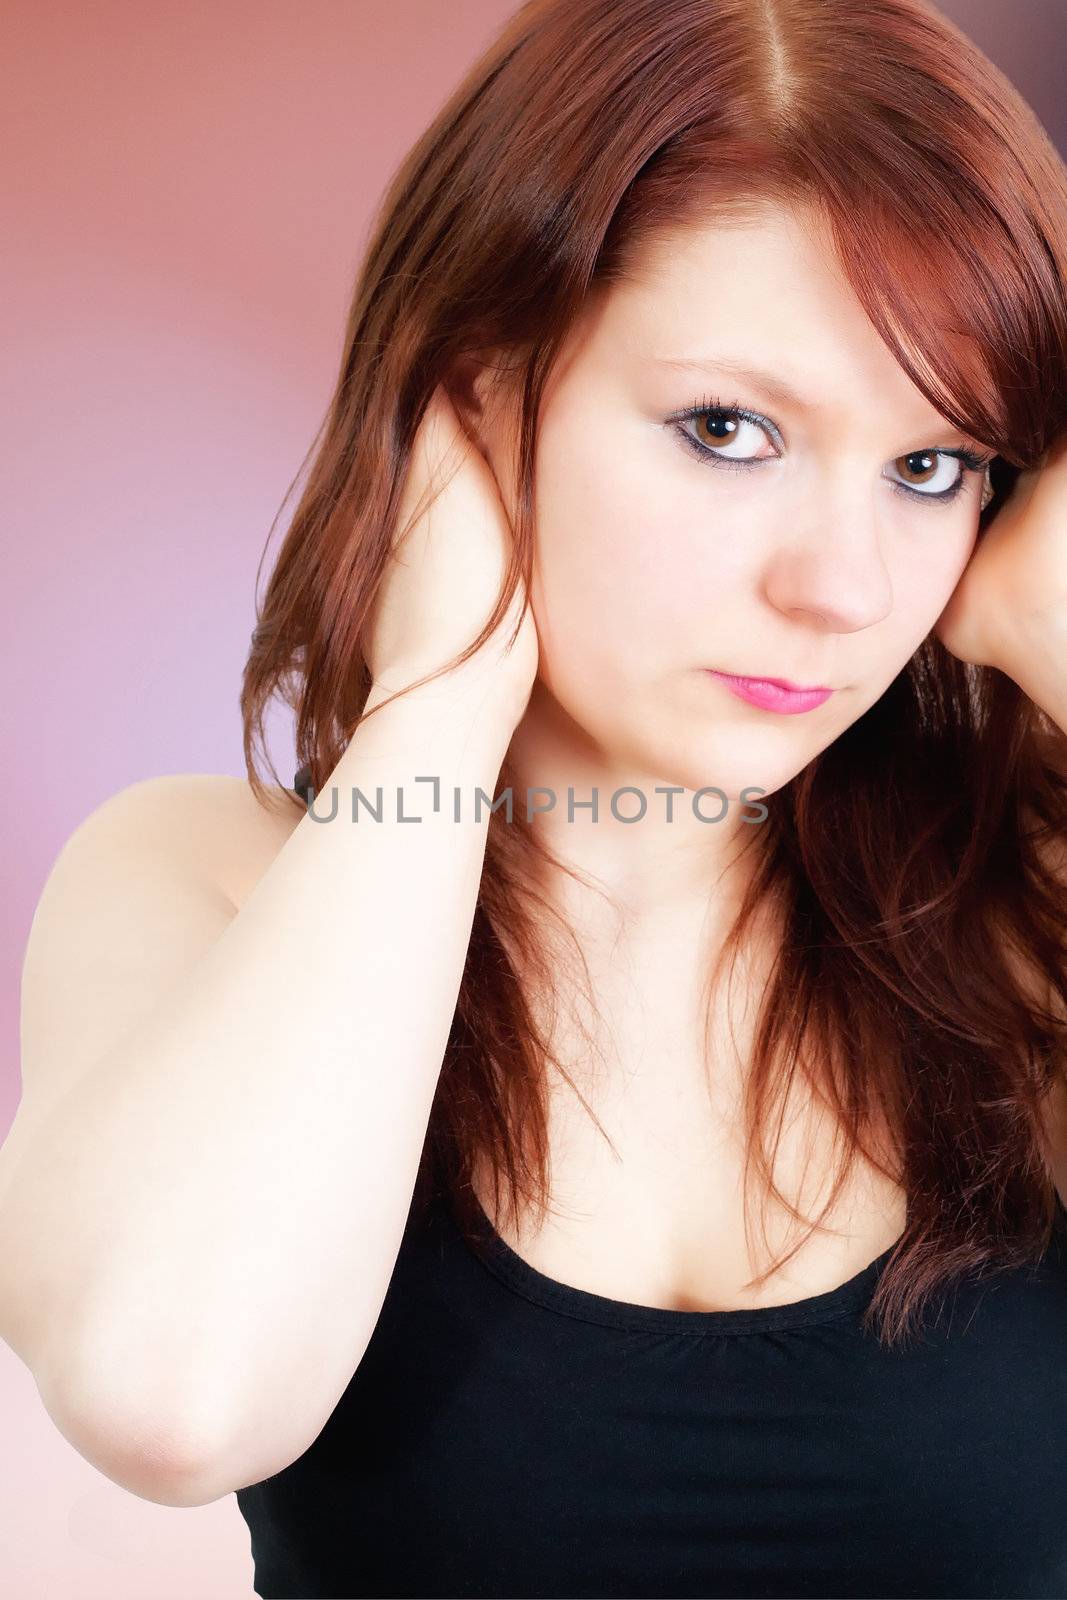 Beautiful woman with brown long hairs. All on colored background.